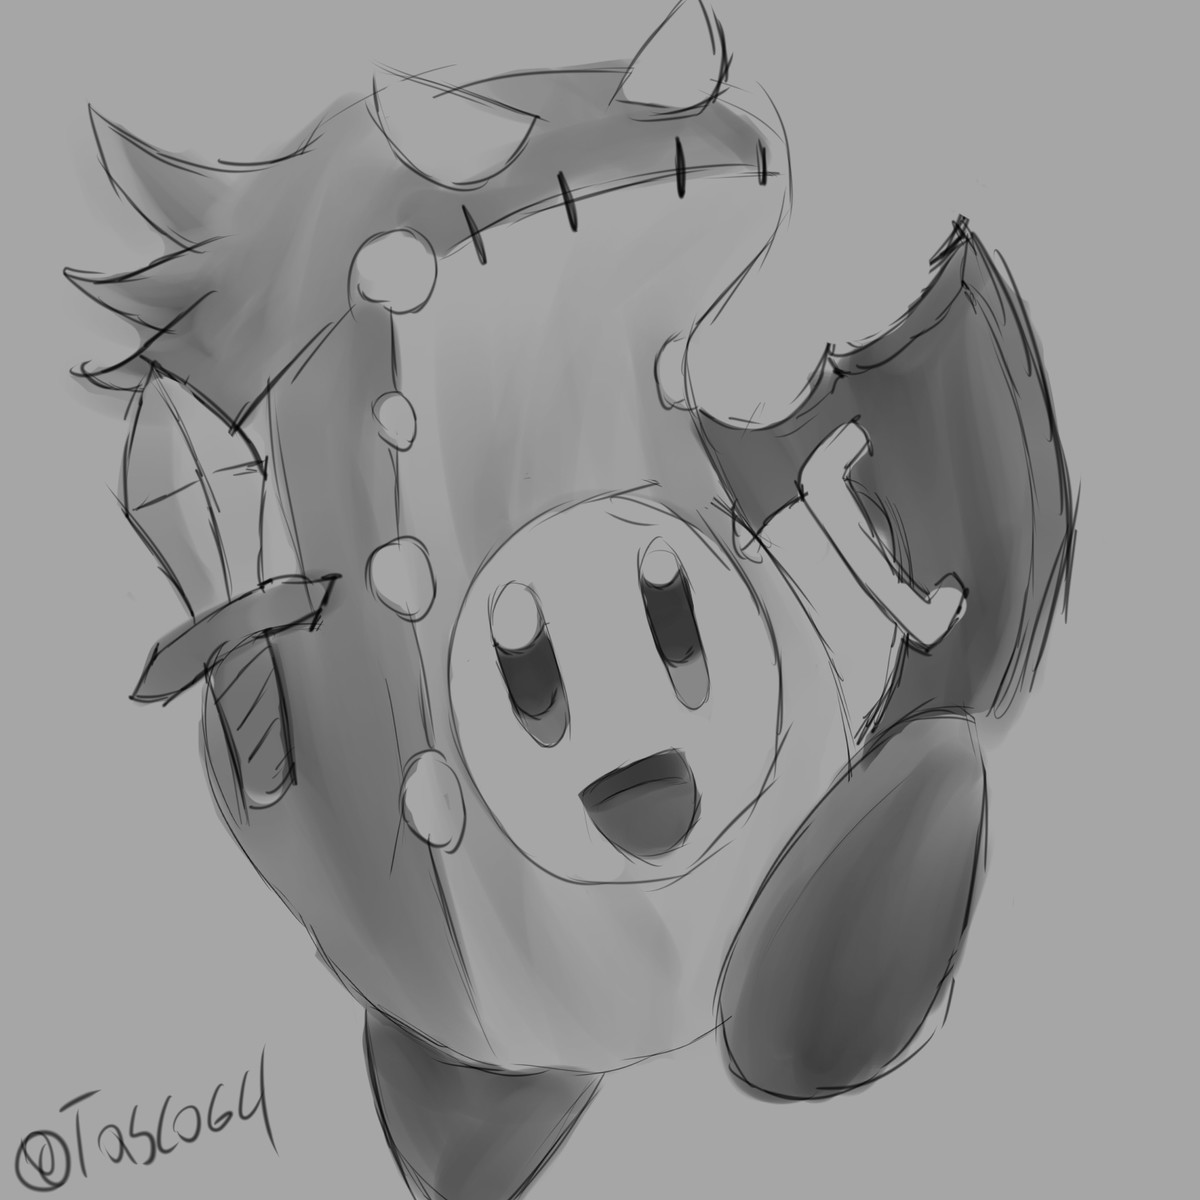 DailyDrawing day 297. time for a crap guide to Kirby join list: SupernerdART (100 subs)Mention History.. A crap guide to getting meme’d on Twitter for a video you made 7 months ago cue lute music